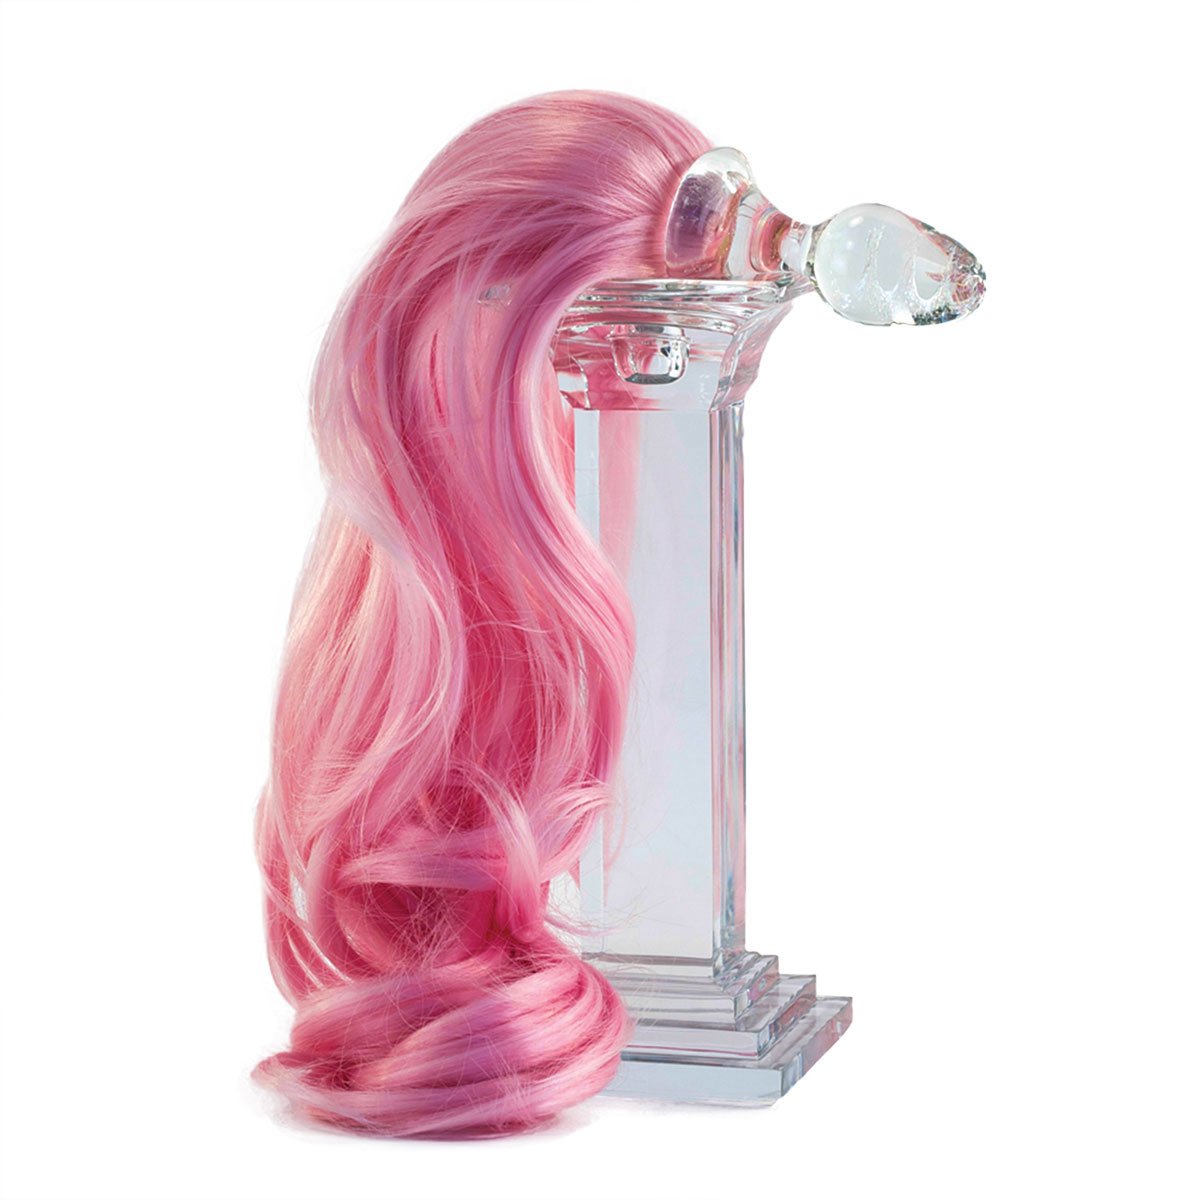 Crystal Delights My Lil Pony Tail - Buy At Luxury Toy X - Free 3-Day Shipping